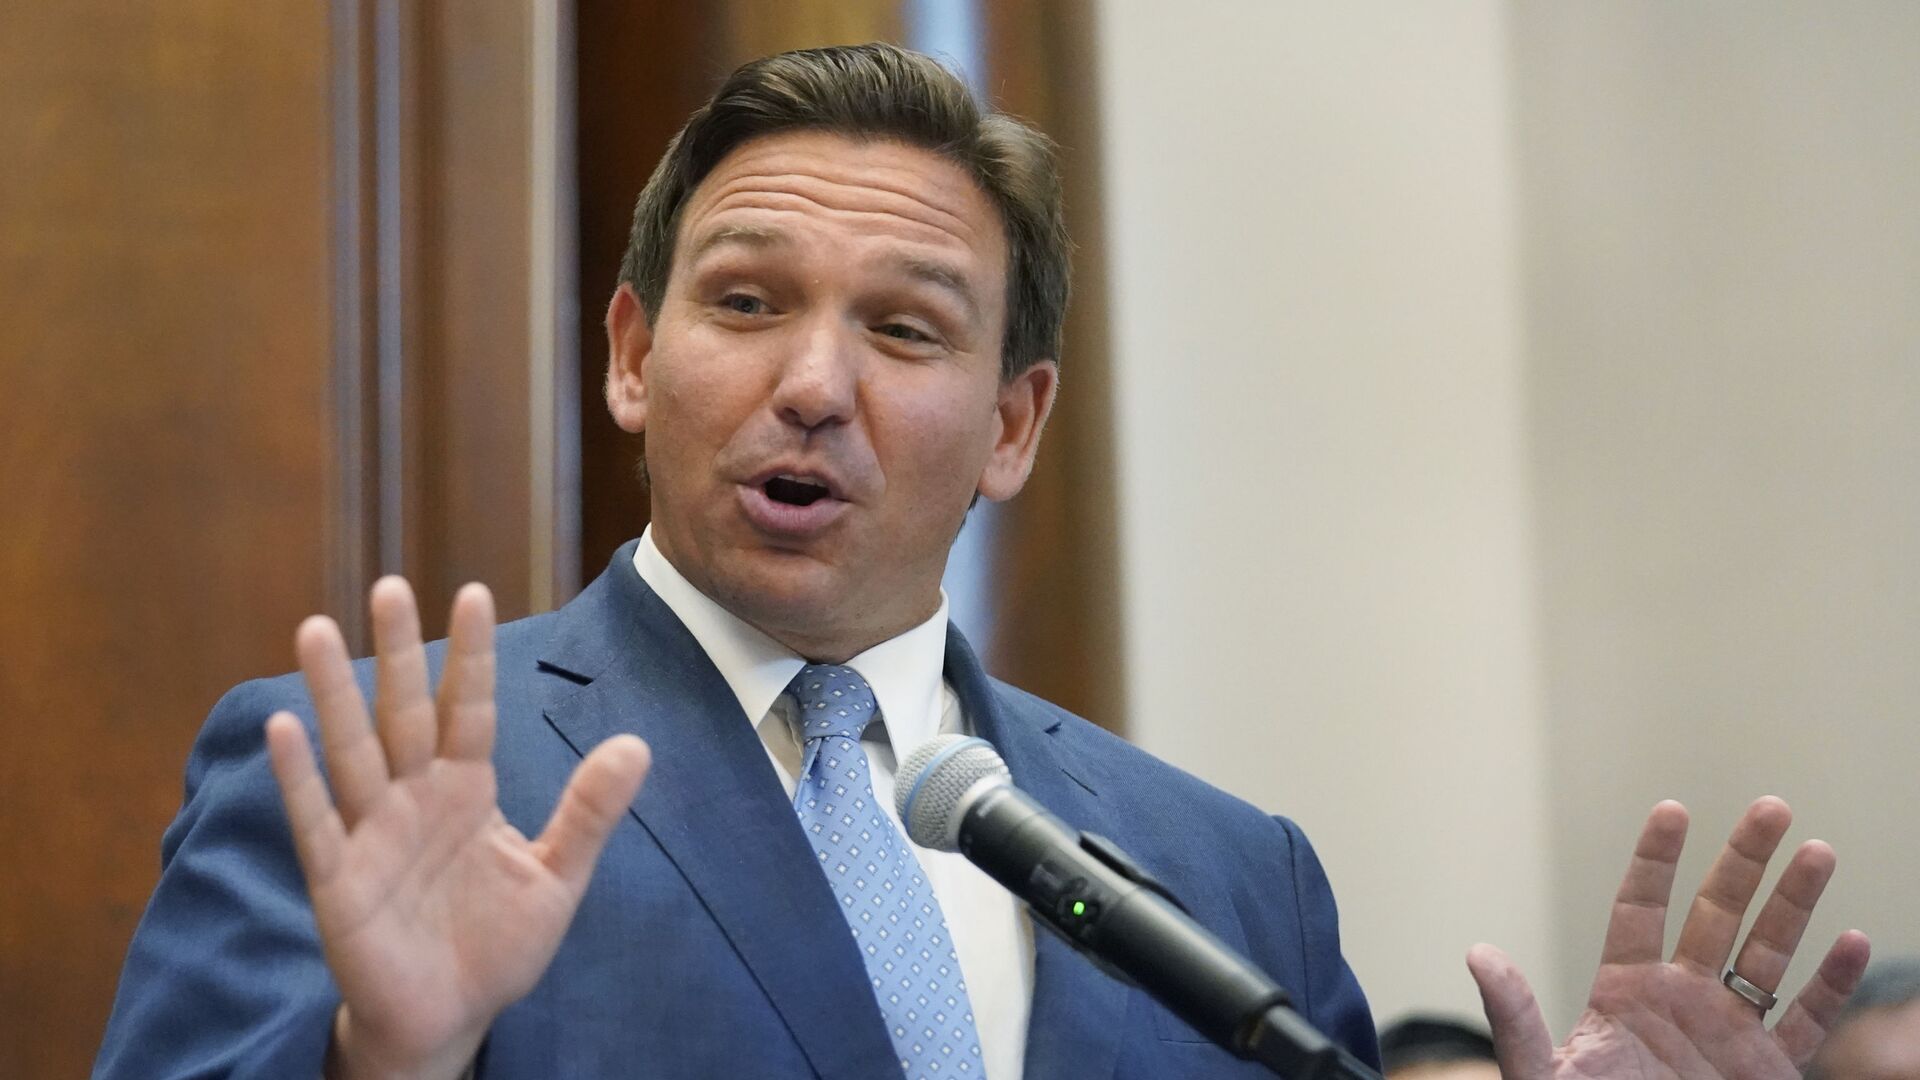 Florida Gov. Ron DeSantis gestures as he speaks, Monday, June 14, 2021, at the Shul of Bal Harbour, a Jewish community center in Surfside, Fla. DeSantis visited the South Florida temple to denounce anti-Semitism and stand with Israel, while signing a bill into law that would require public schools in his state to set aside moments of silence for children to meditate or pray - Sputnik International, 1920, 31.01.2022